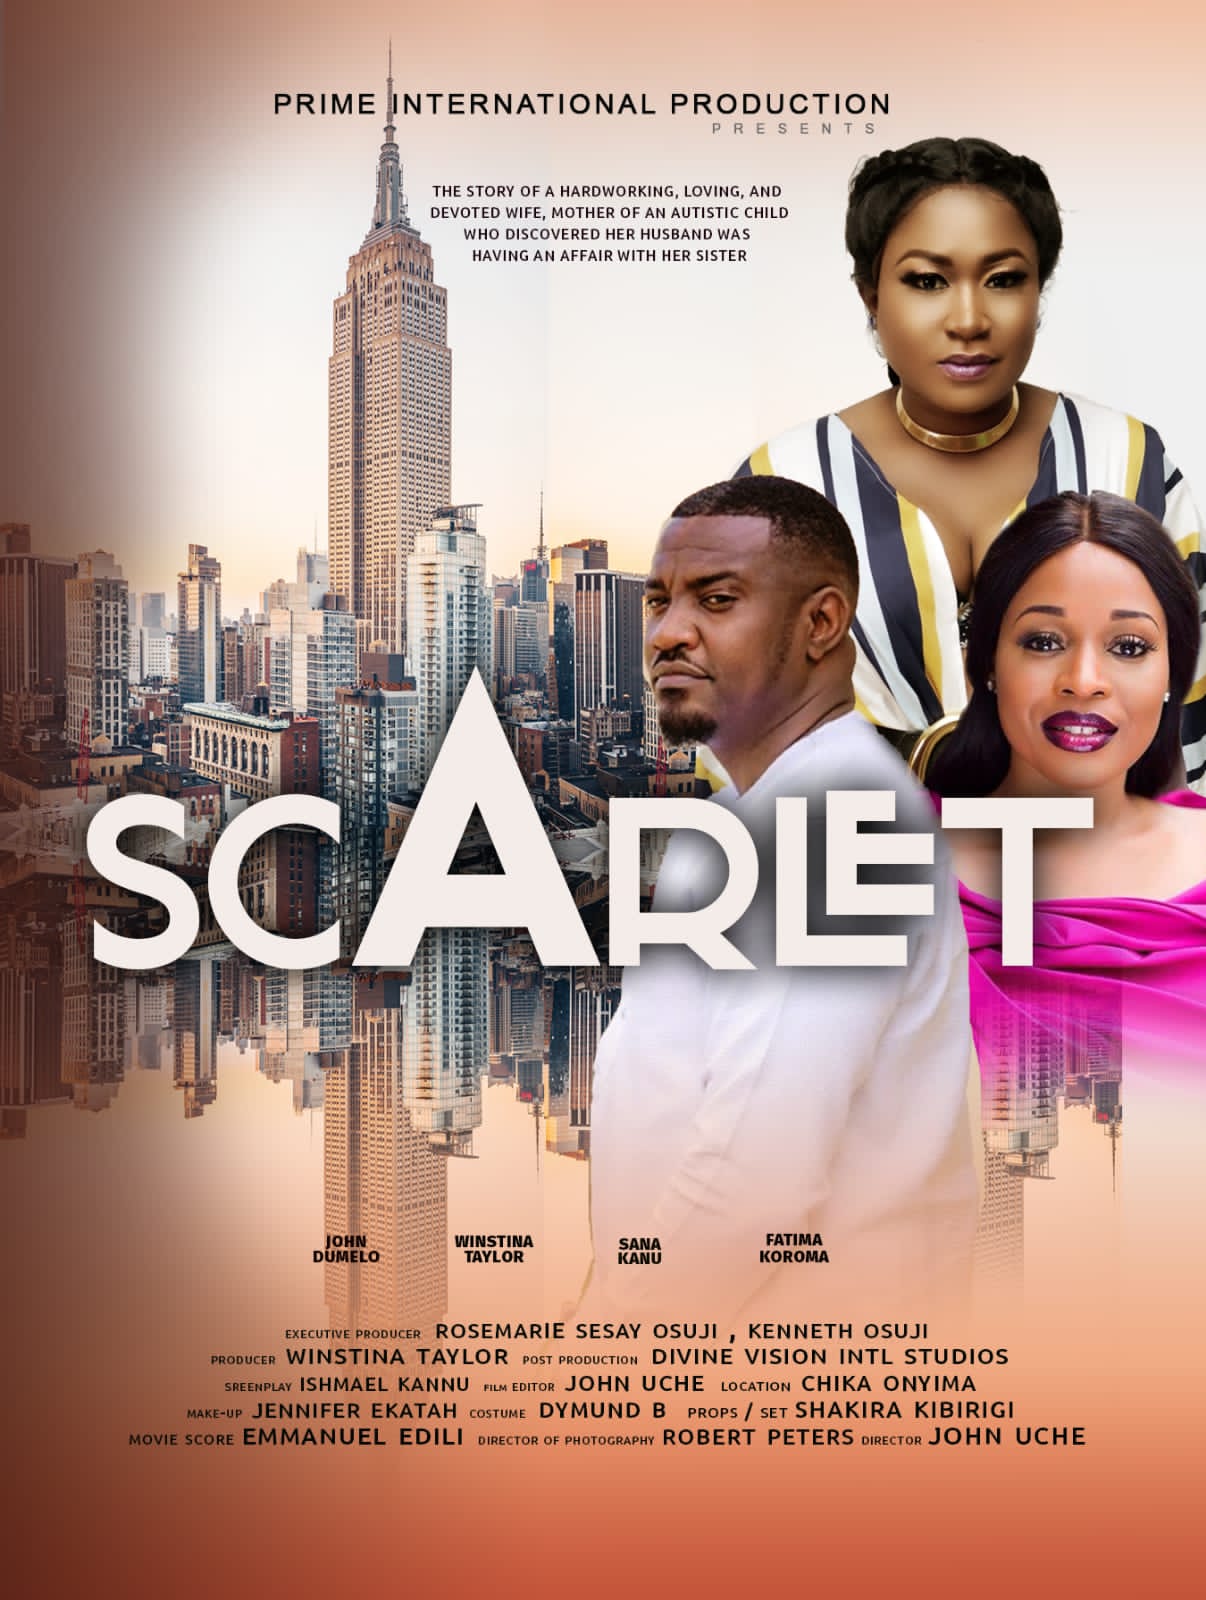 The movie Scarlet enthrals audiences in the romantic drama genre